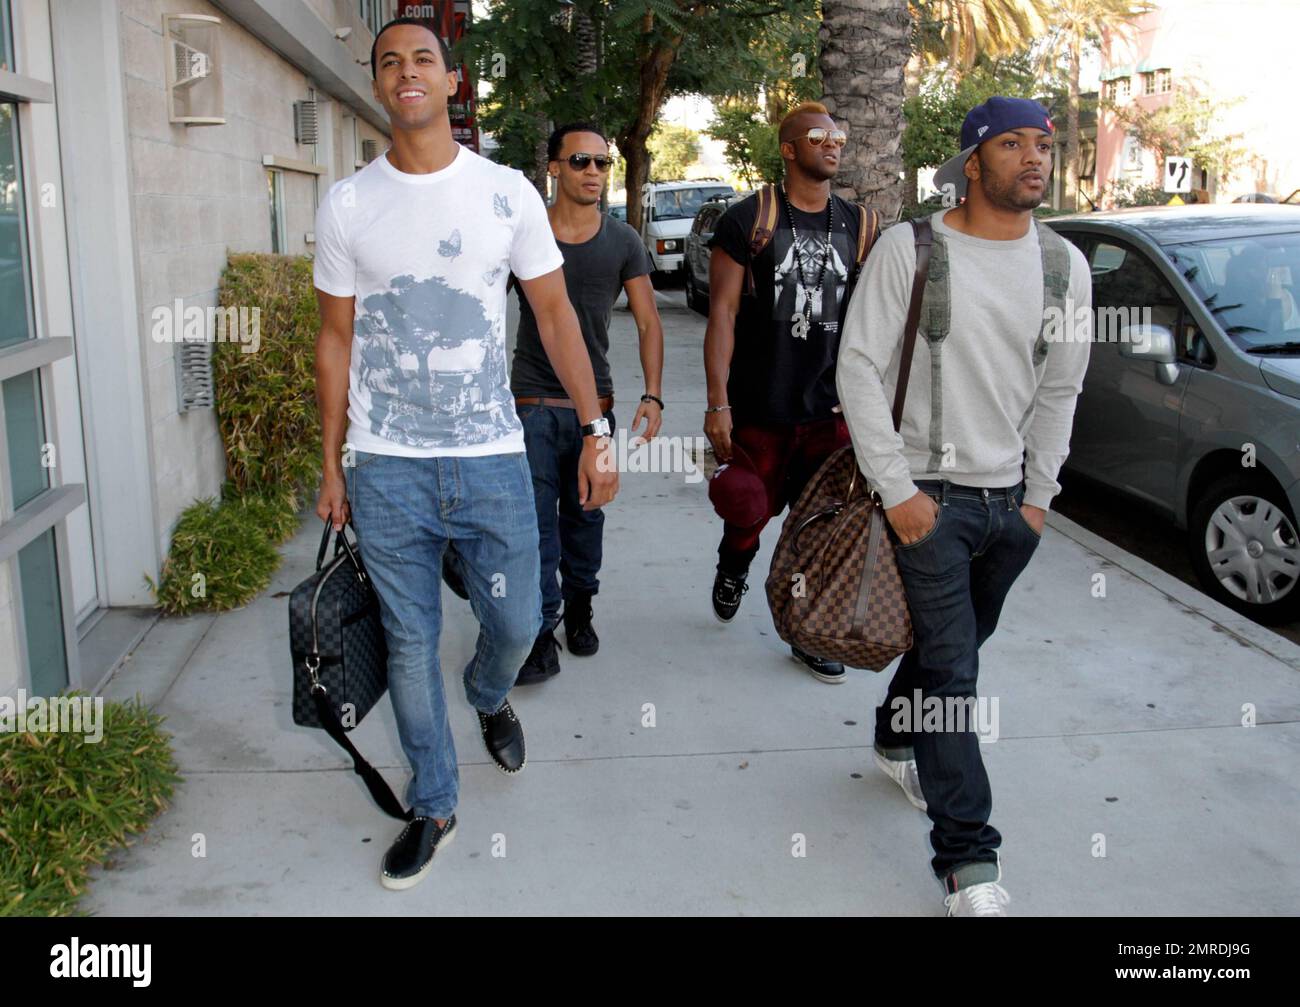 EXCLUSIVE!! A day after their arrival in Los Angeles the JLS boys